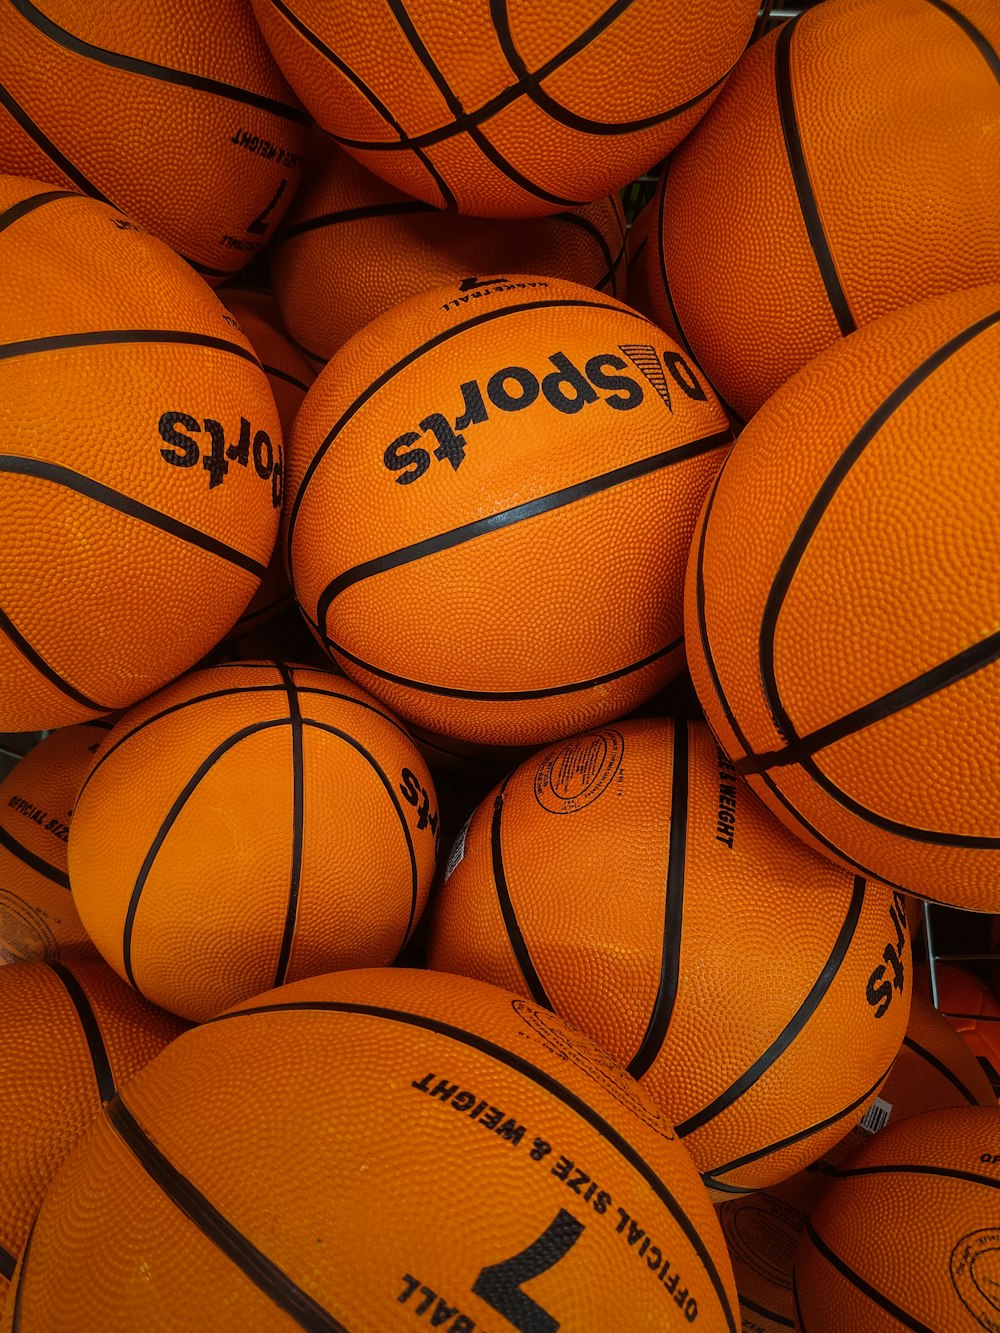 a pile of basketballs sitting on top of each other